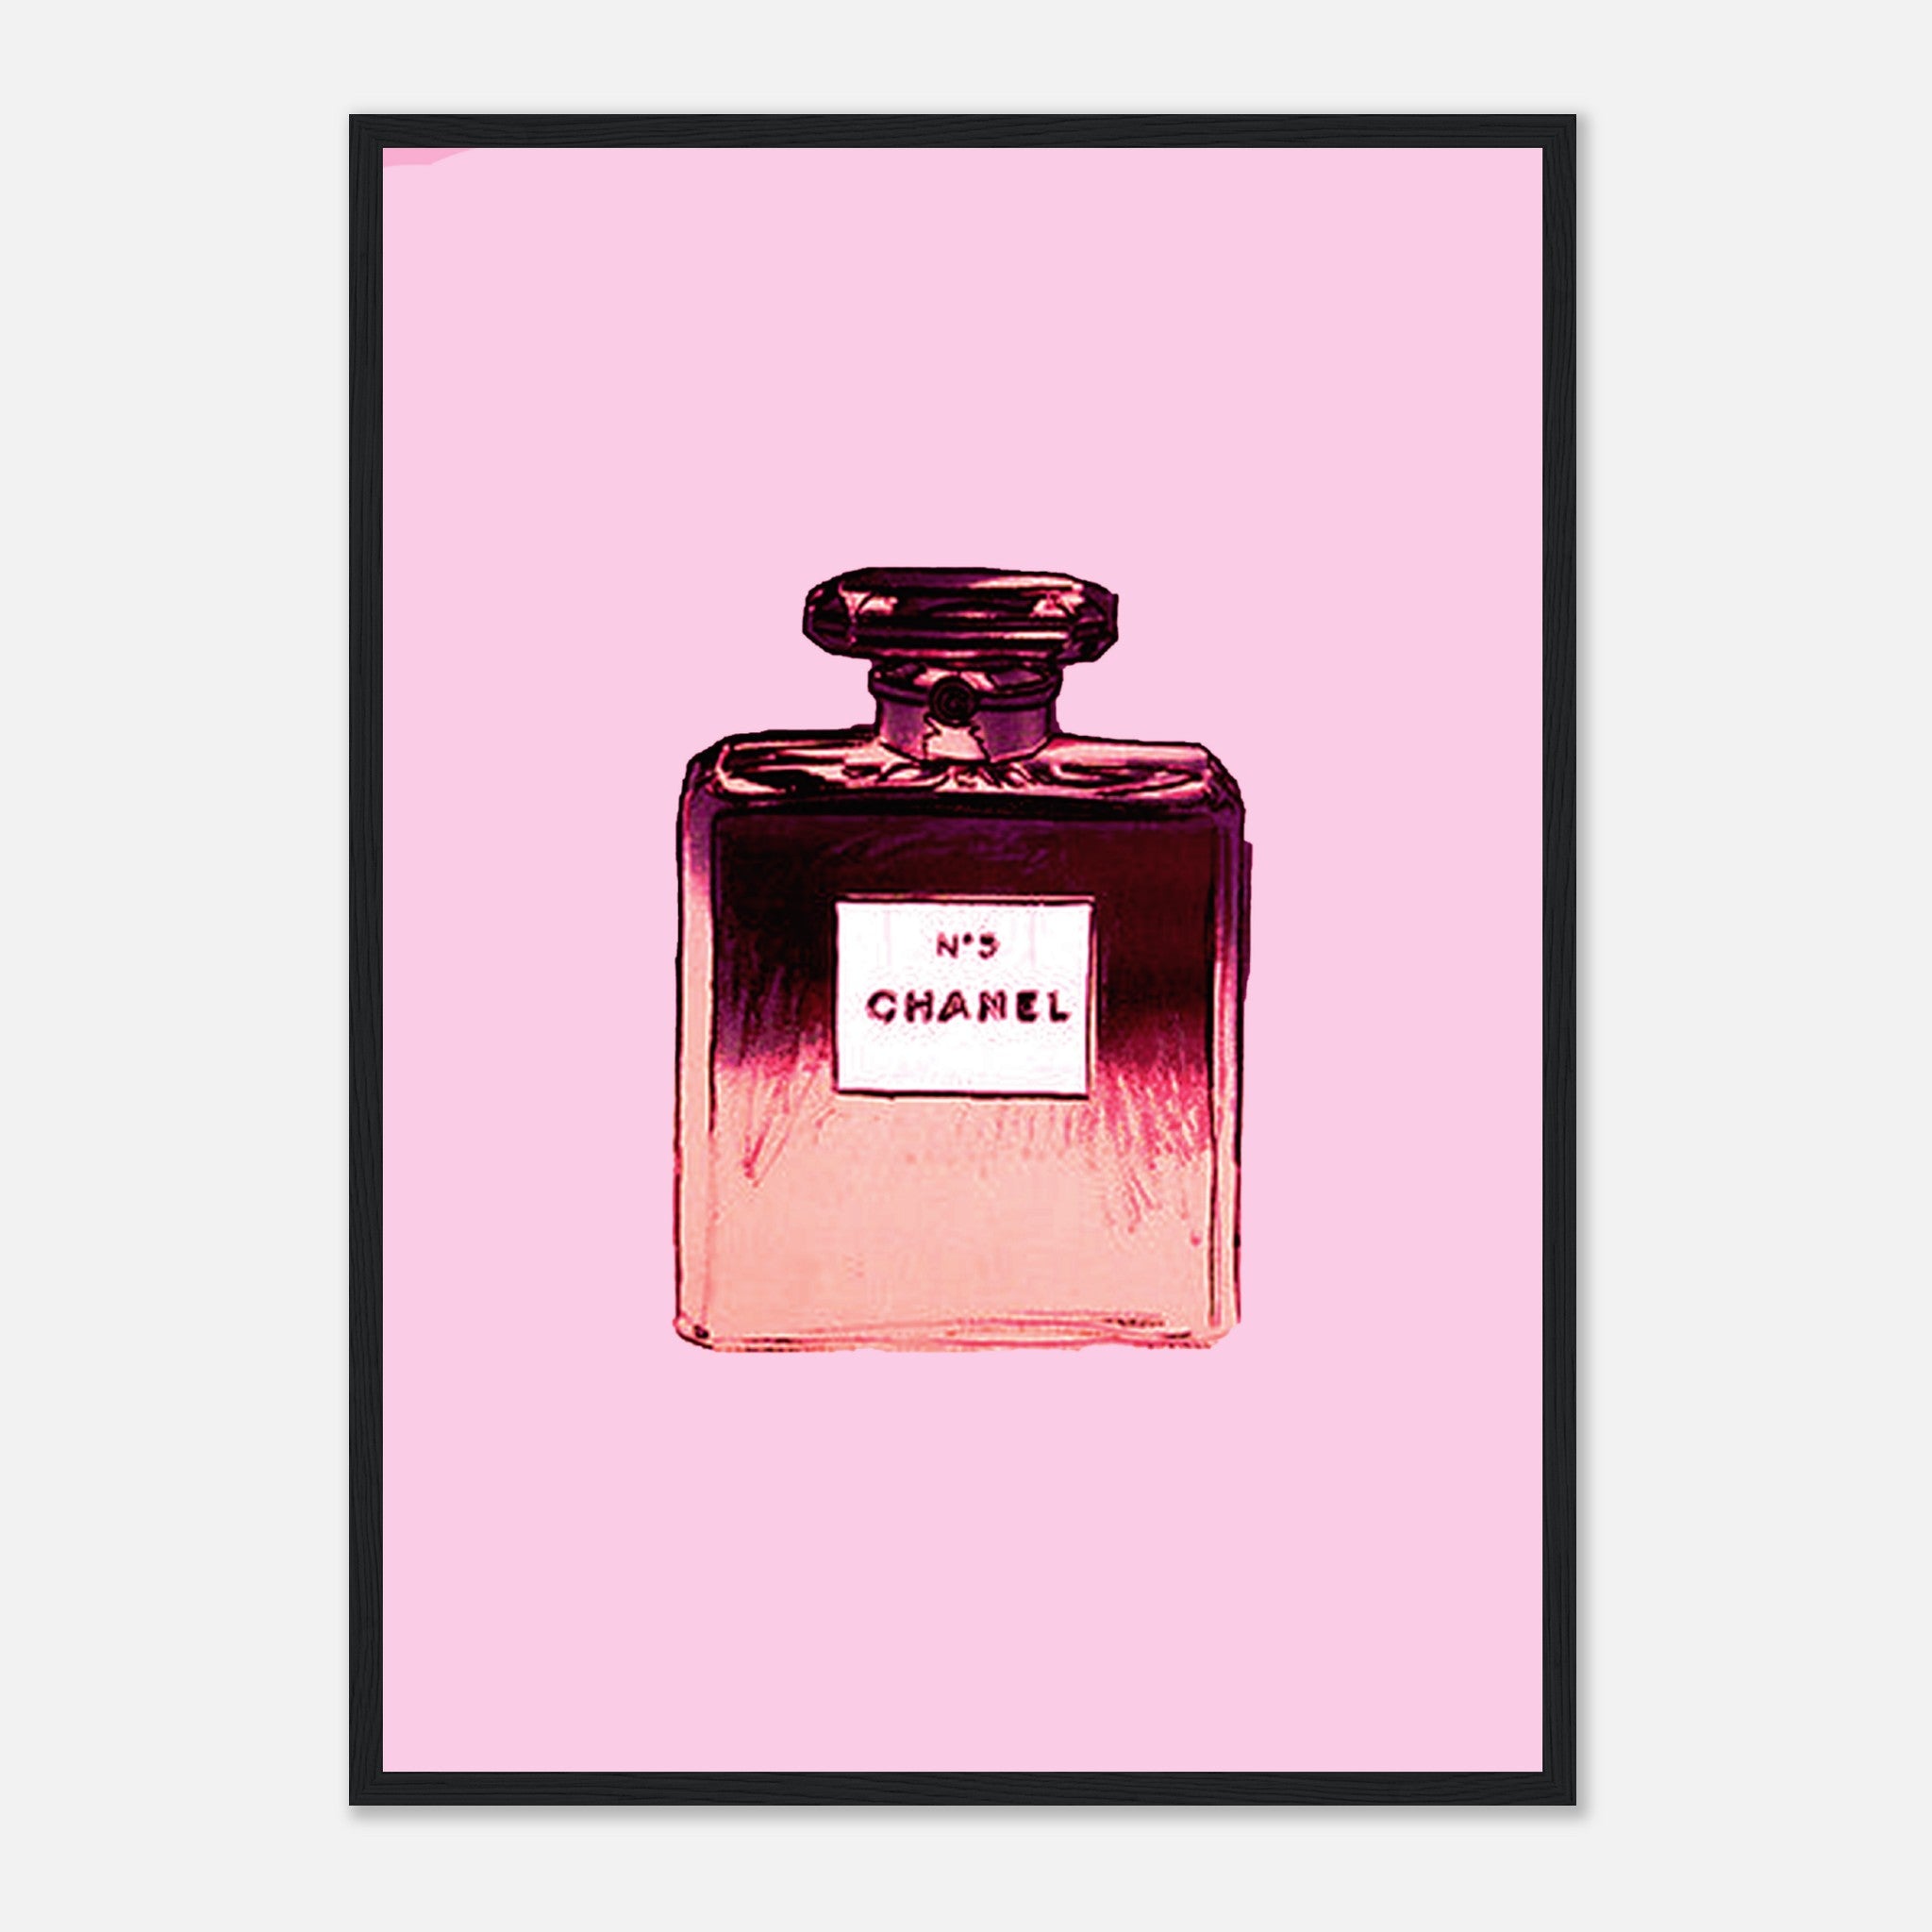 Chanel No5 2 Poster